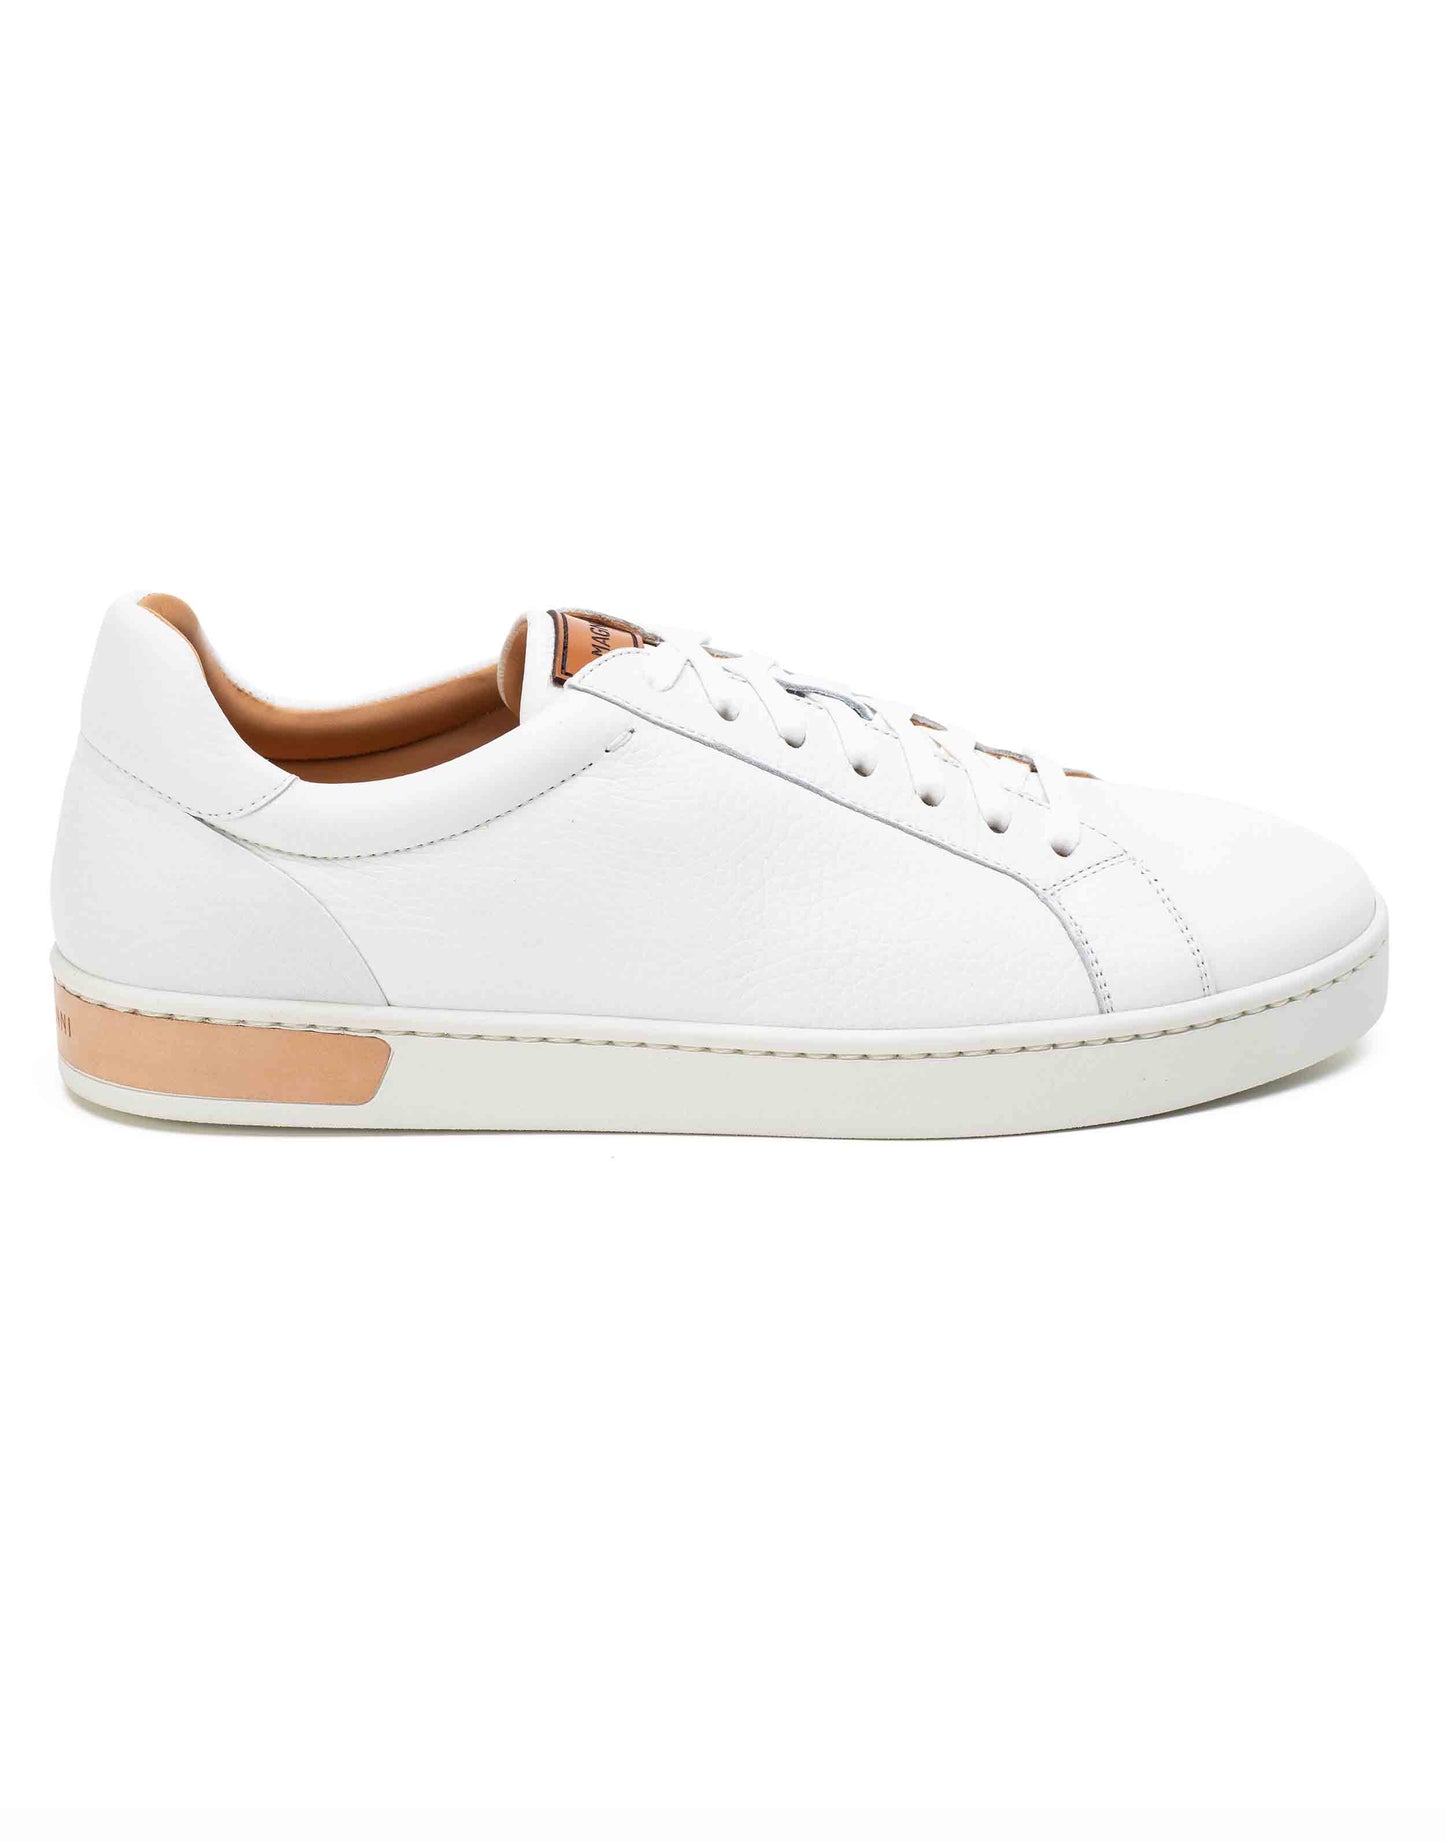 Magnanni Snow Sneaker With Gold Accents